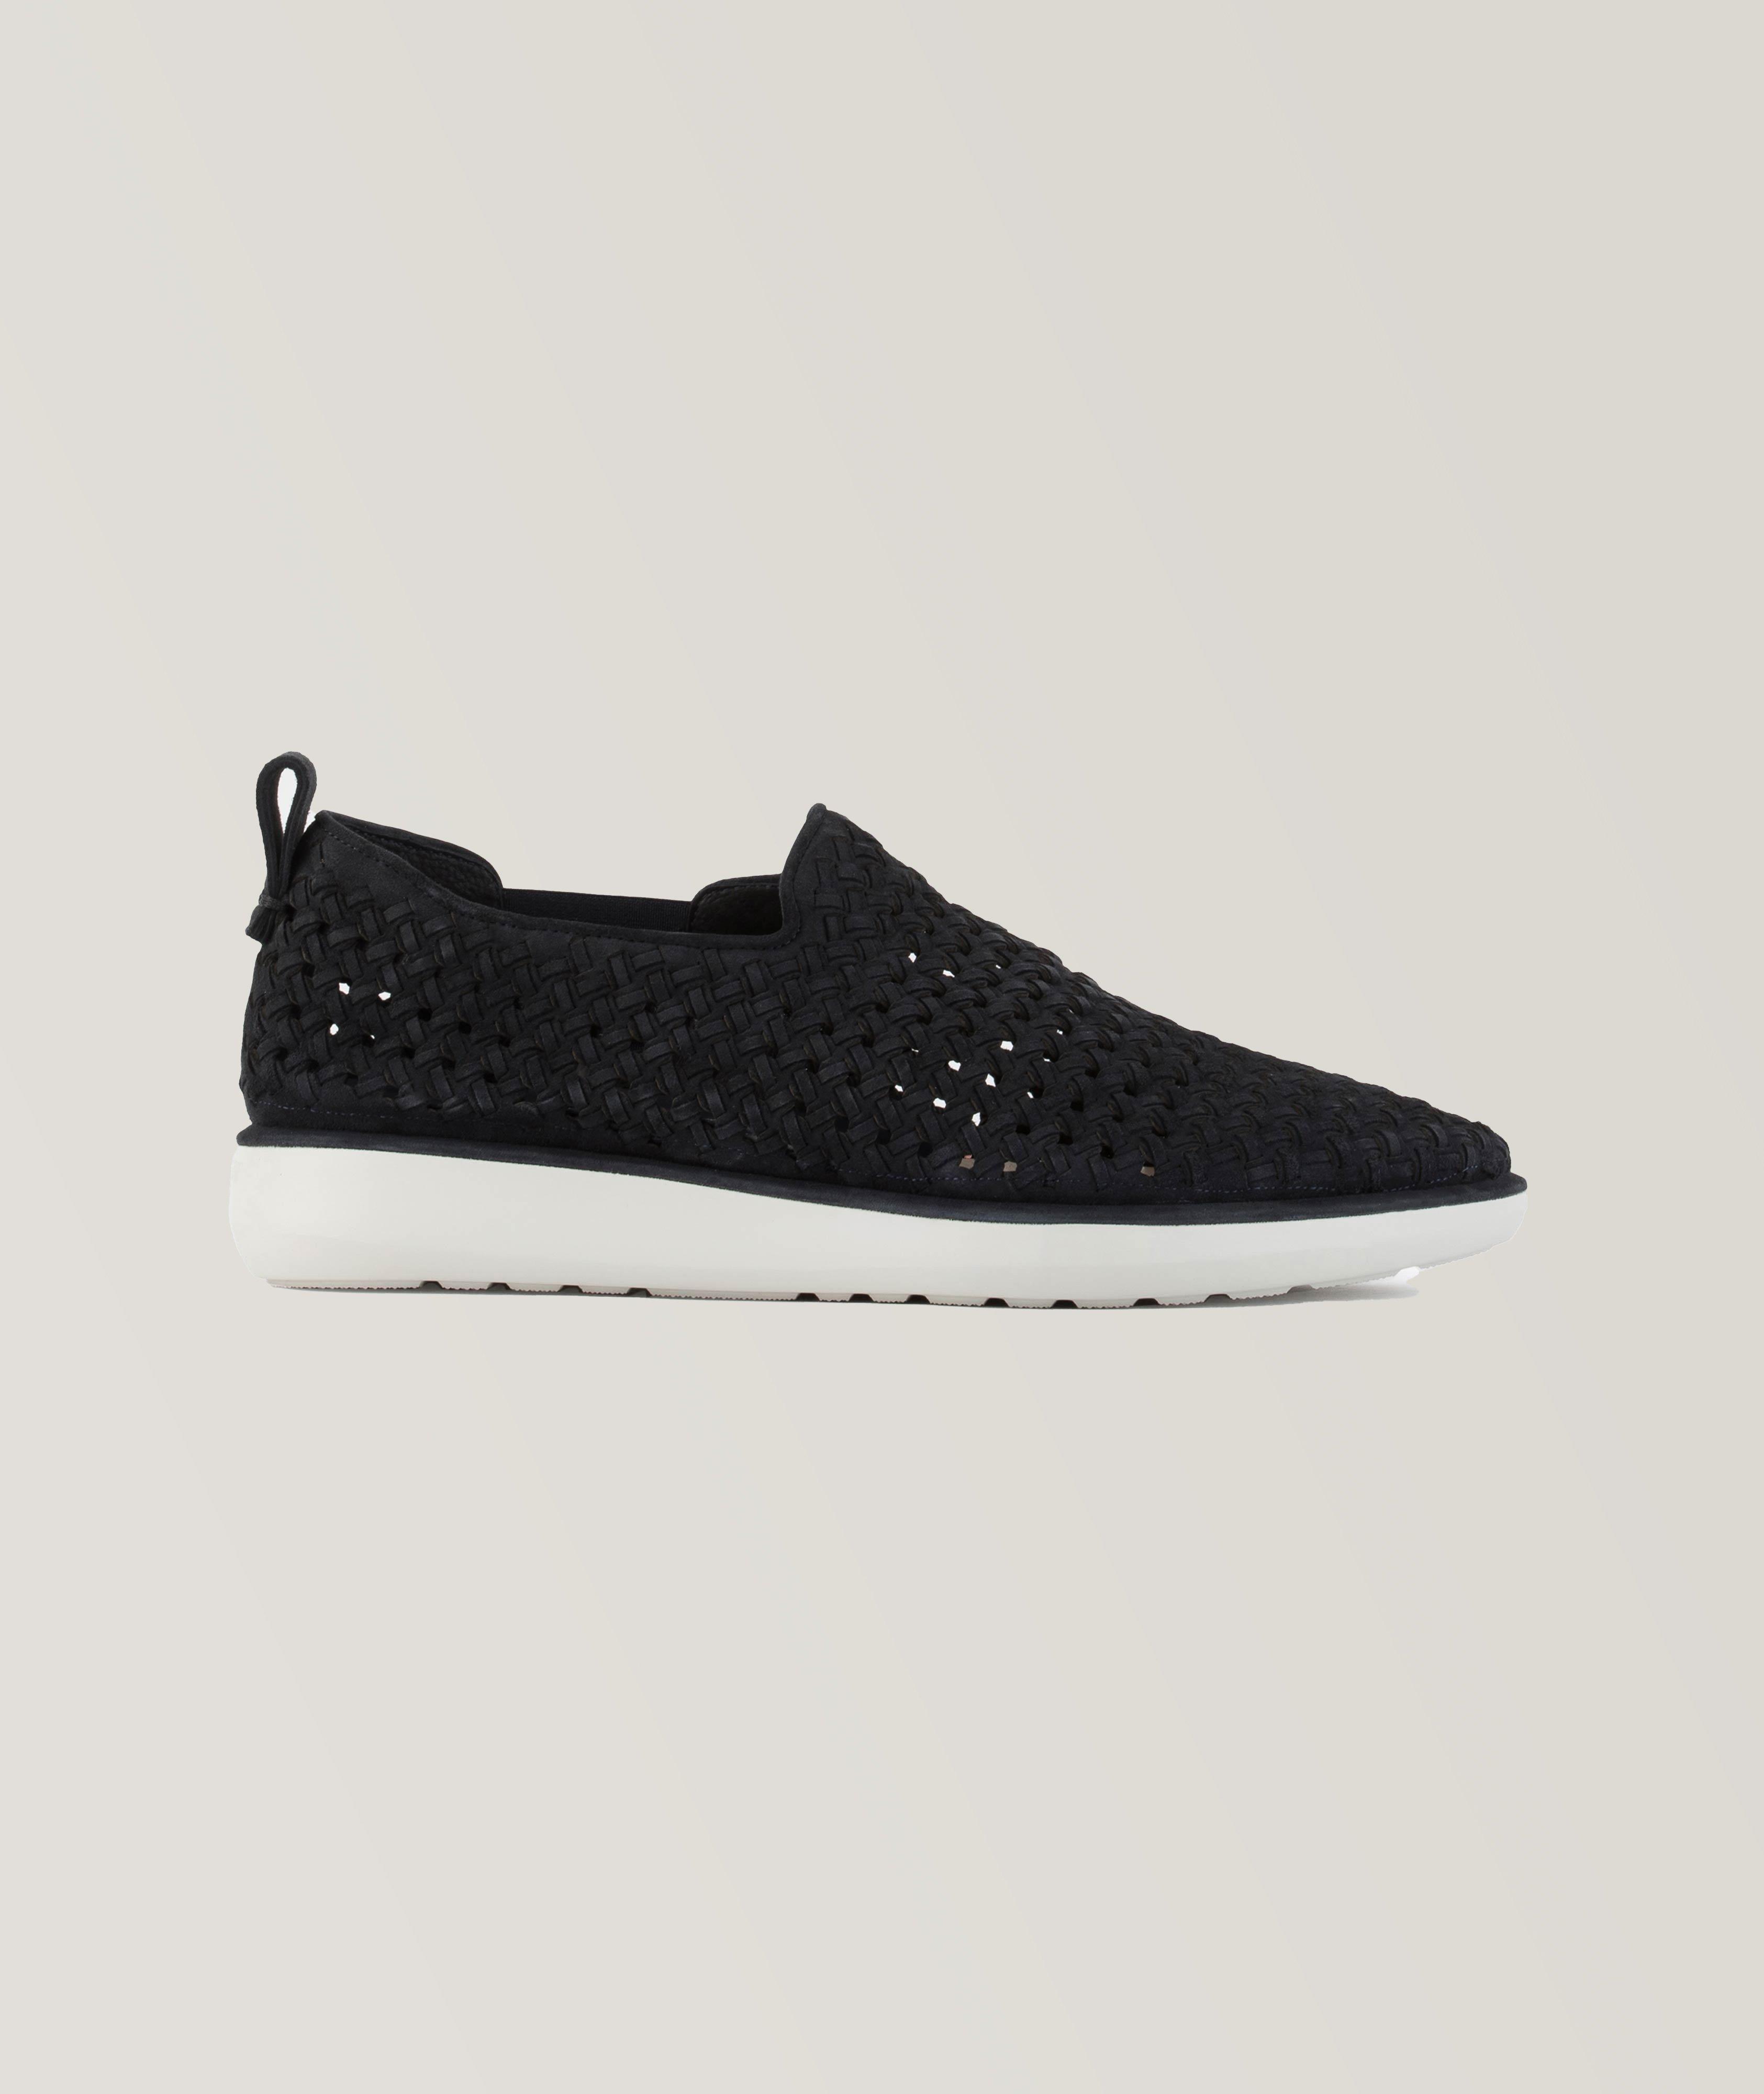 Woven Leather Slip On Sneakers image 0